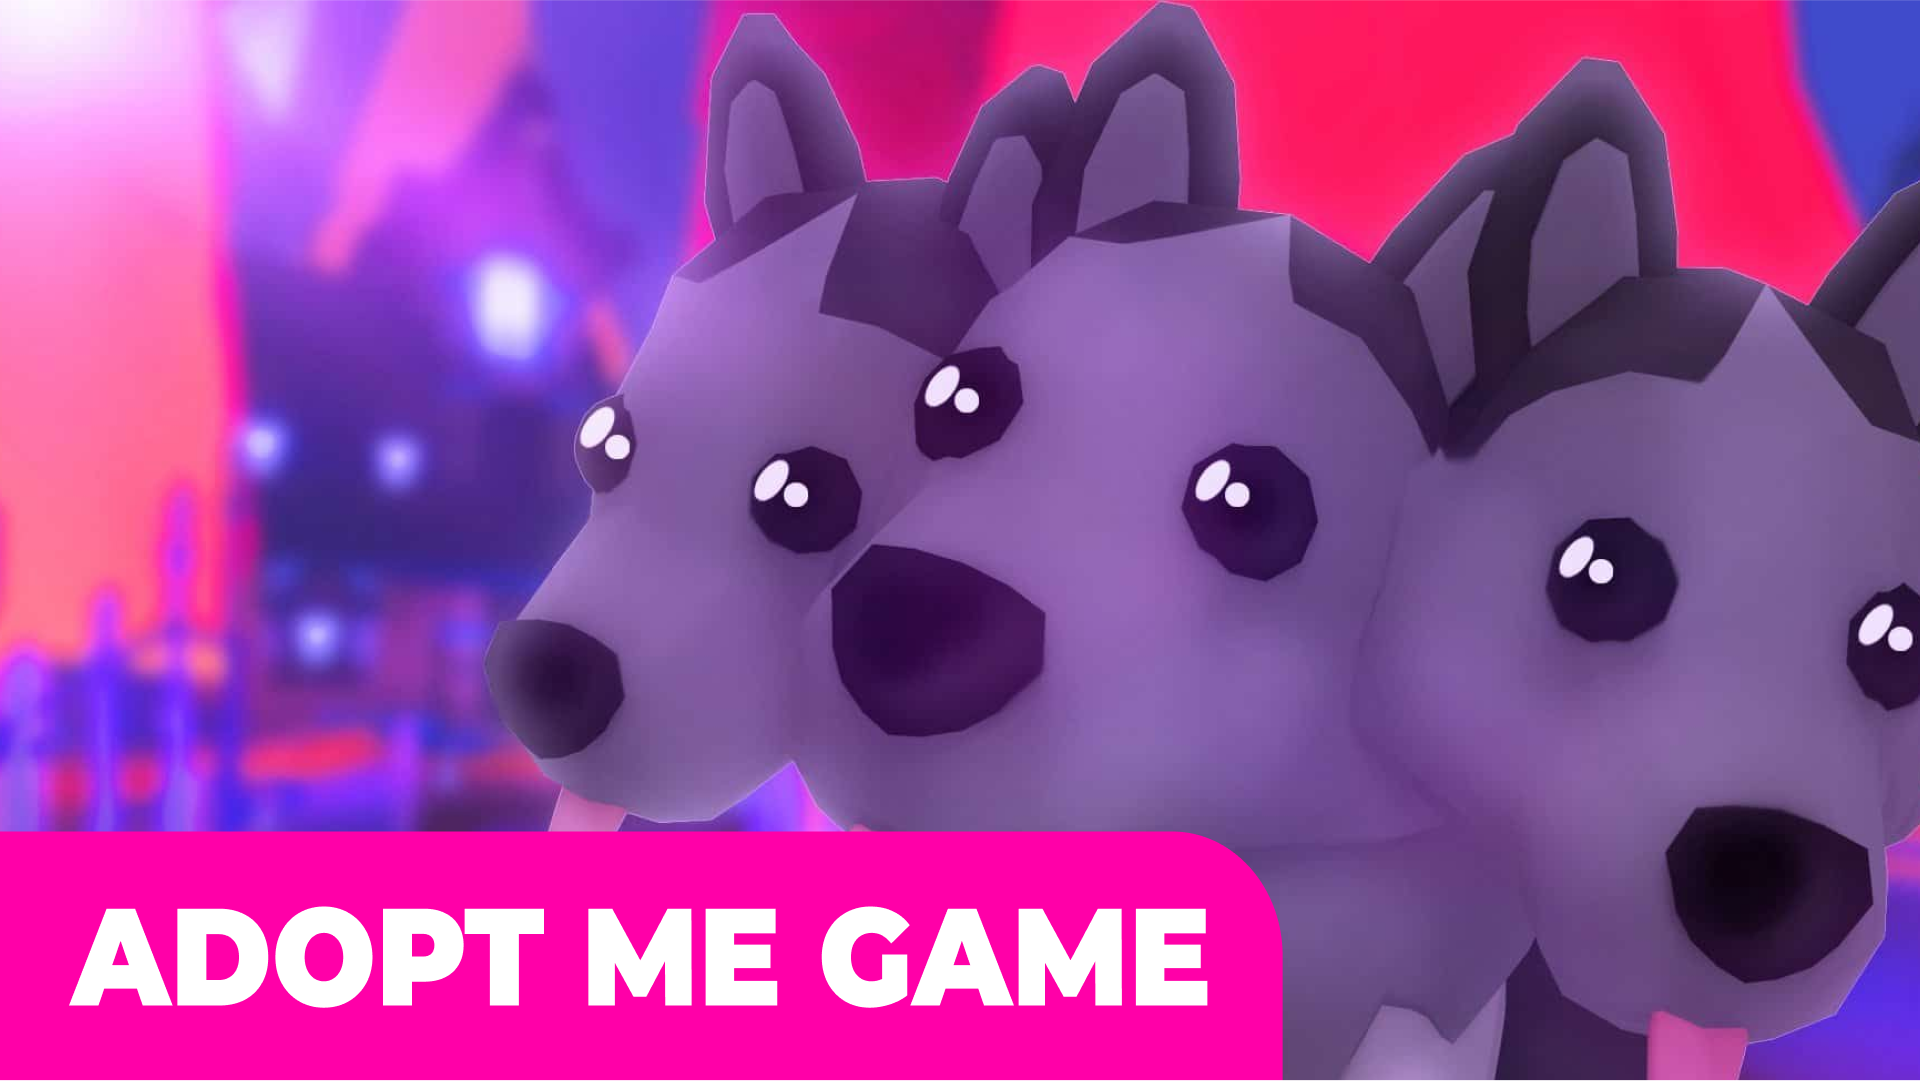 Mod Adopt Me: pets for roblox APK 1.4.7 for Android – Download Mod